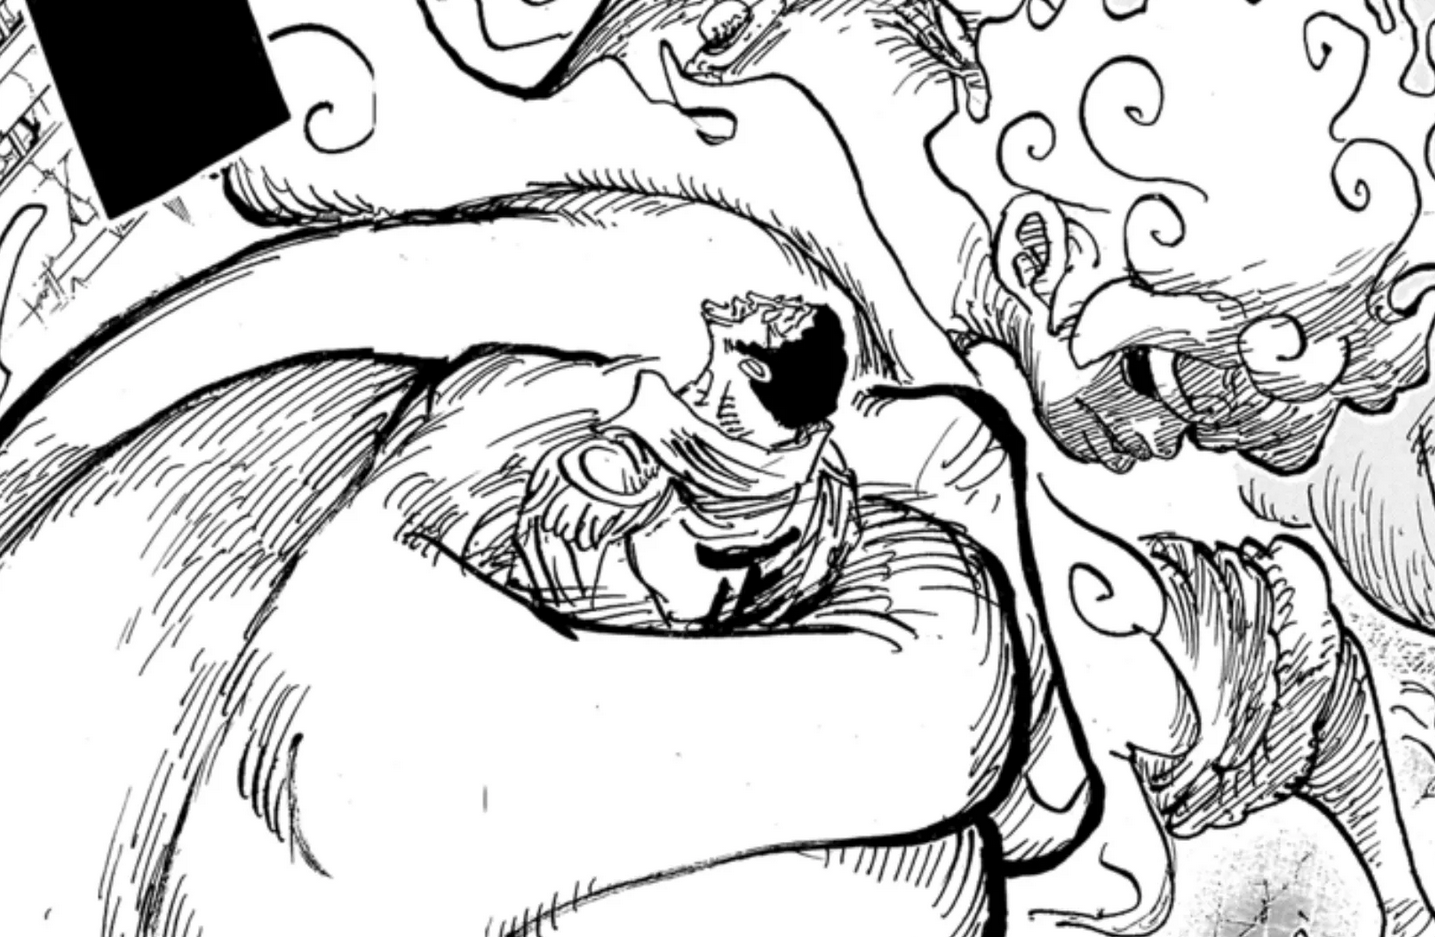 One Piece' Manga Schedule: Chapter 1109 Release Date & Time